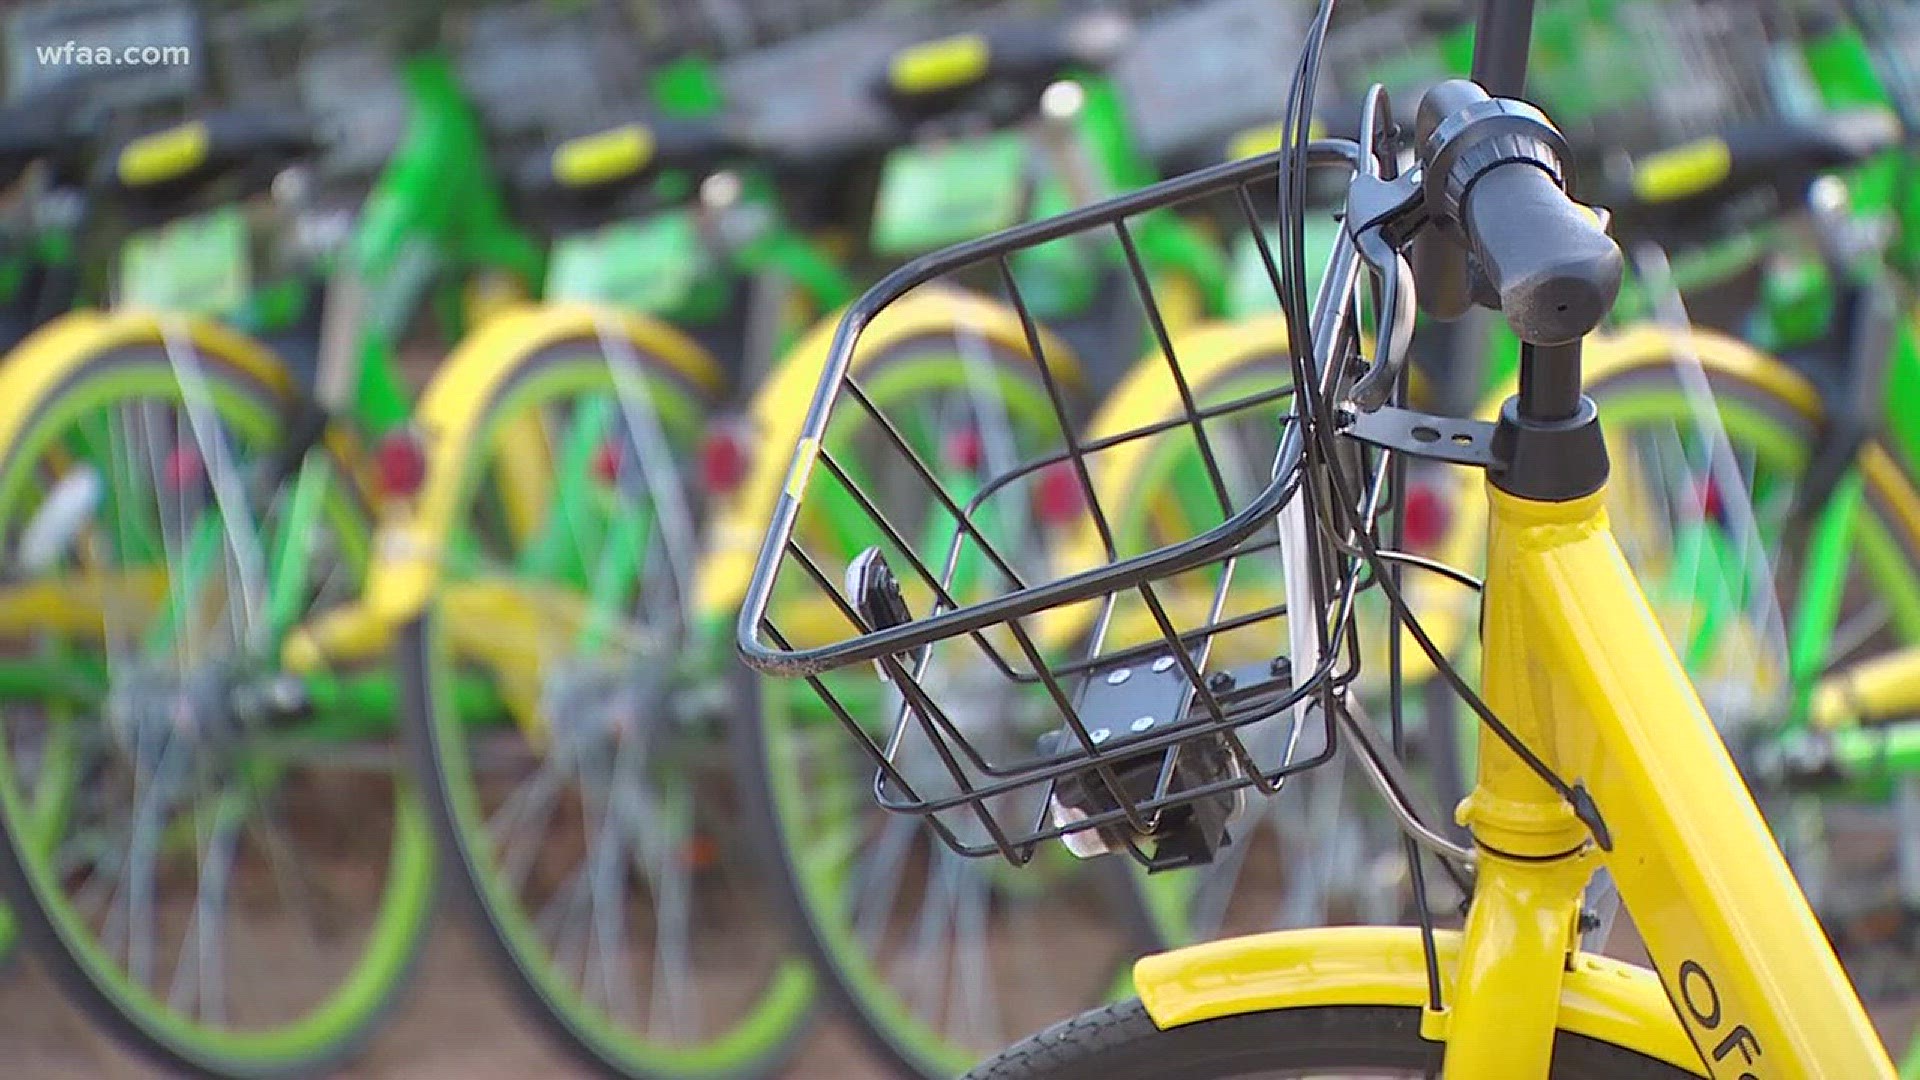 Highland Park is not pleased with the rental bikes that have been dropped on Dallas streets in recent months by the thousands. A new ordinance, approved by the town council, essentially outlaws them entirely.